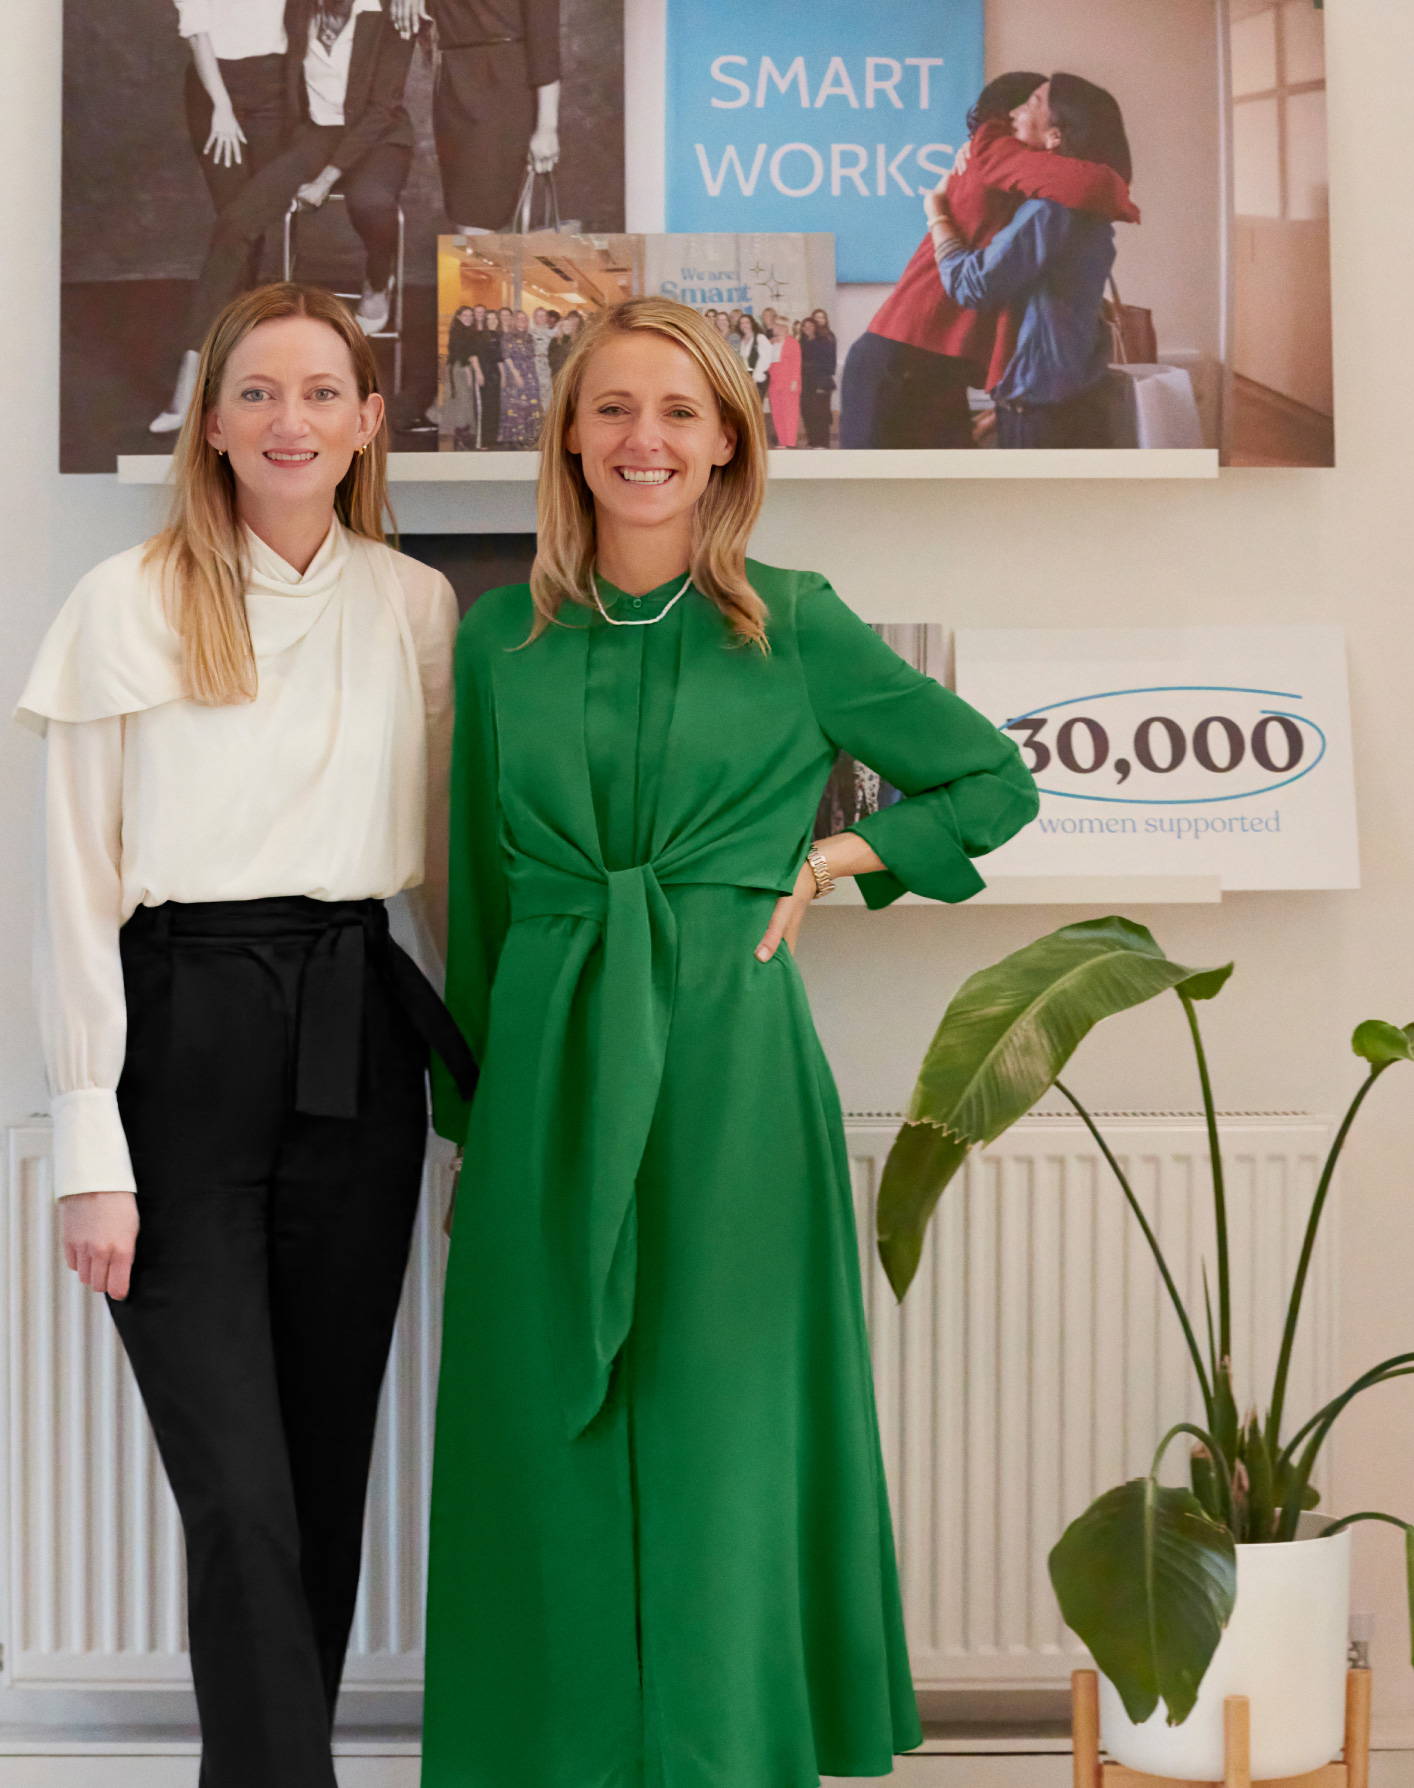 Polly McMaster and Kate Stephens wearing The Fold at Smart Works Offices